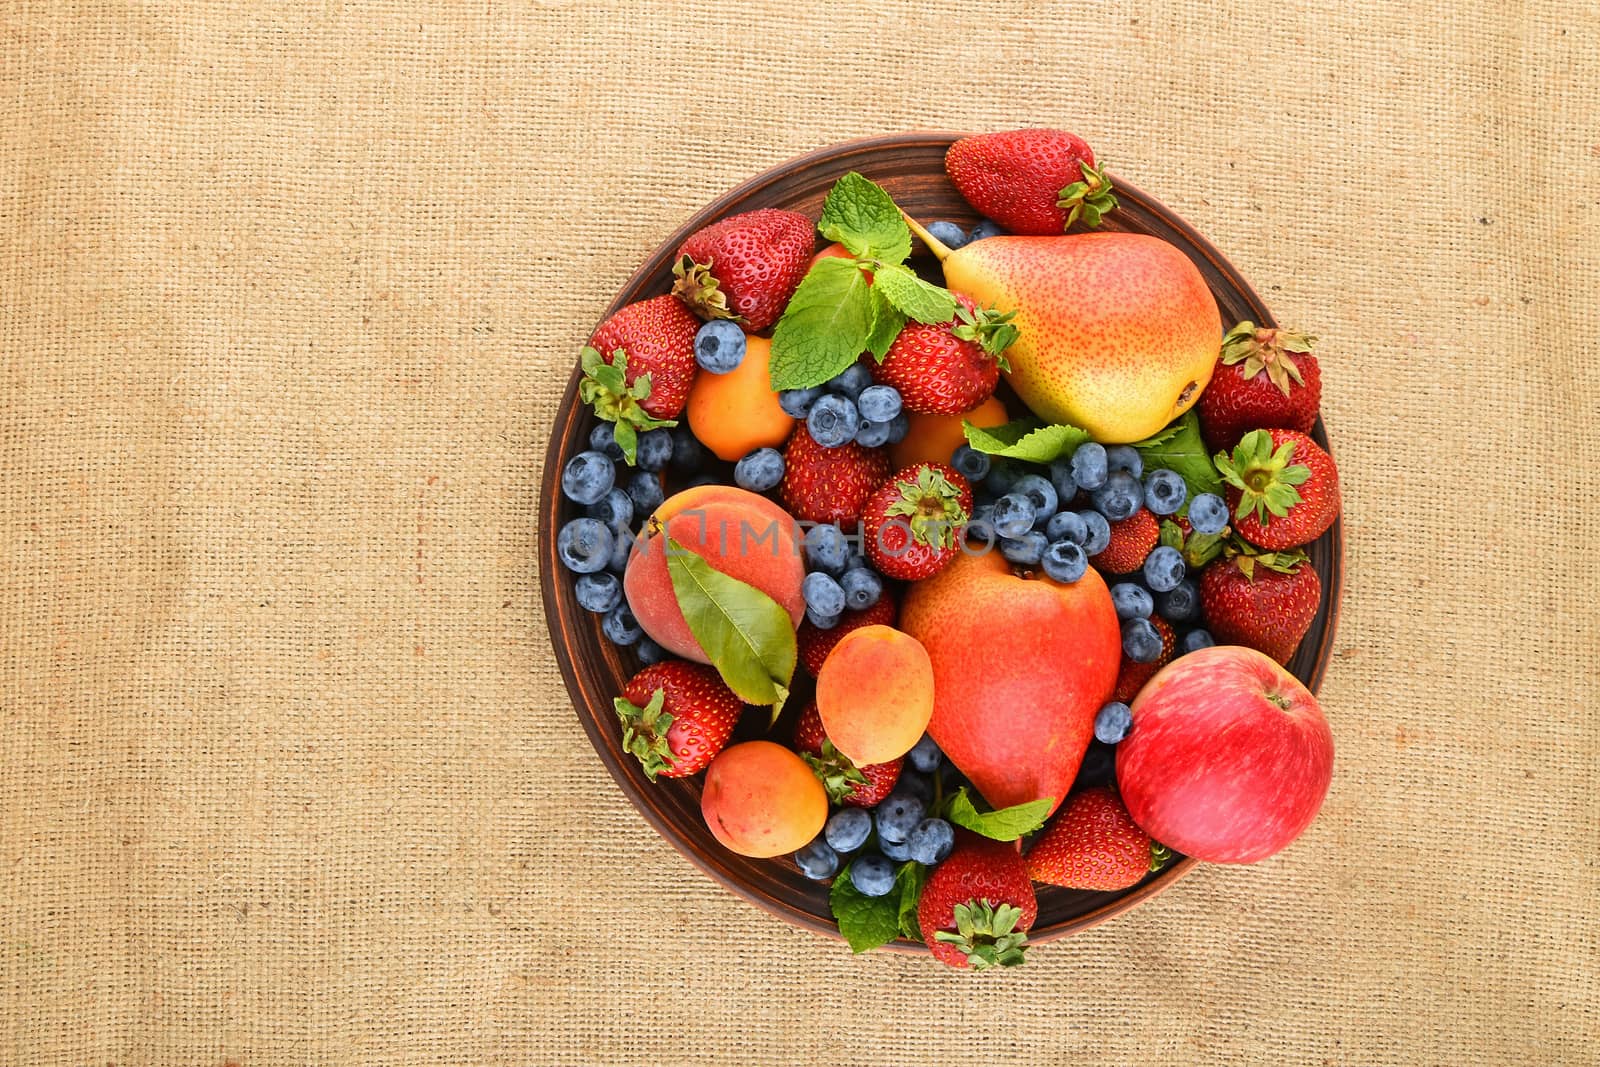 Fruits and berries mix in ceramic plate on burlap canvas by BreakingTheWalls